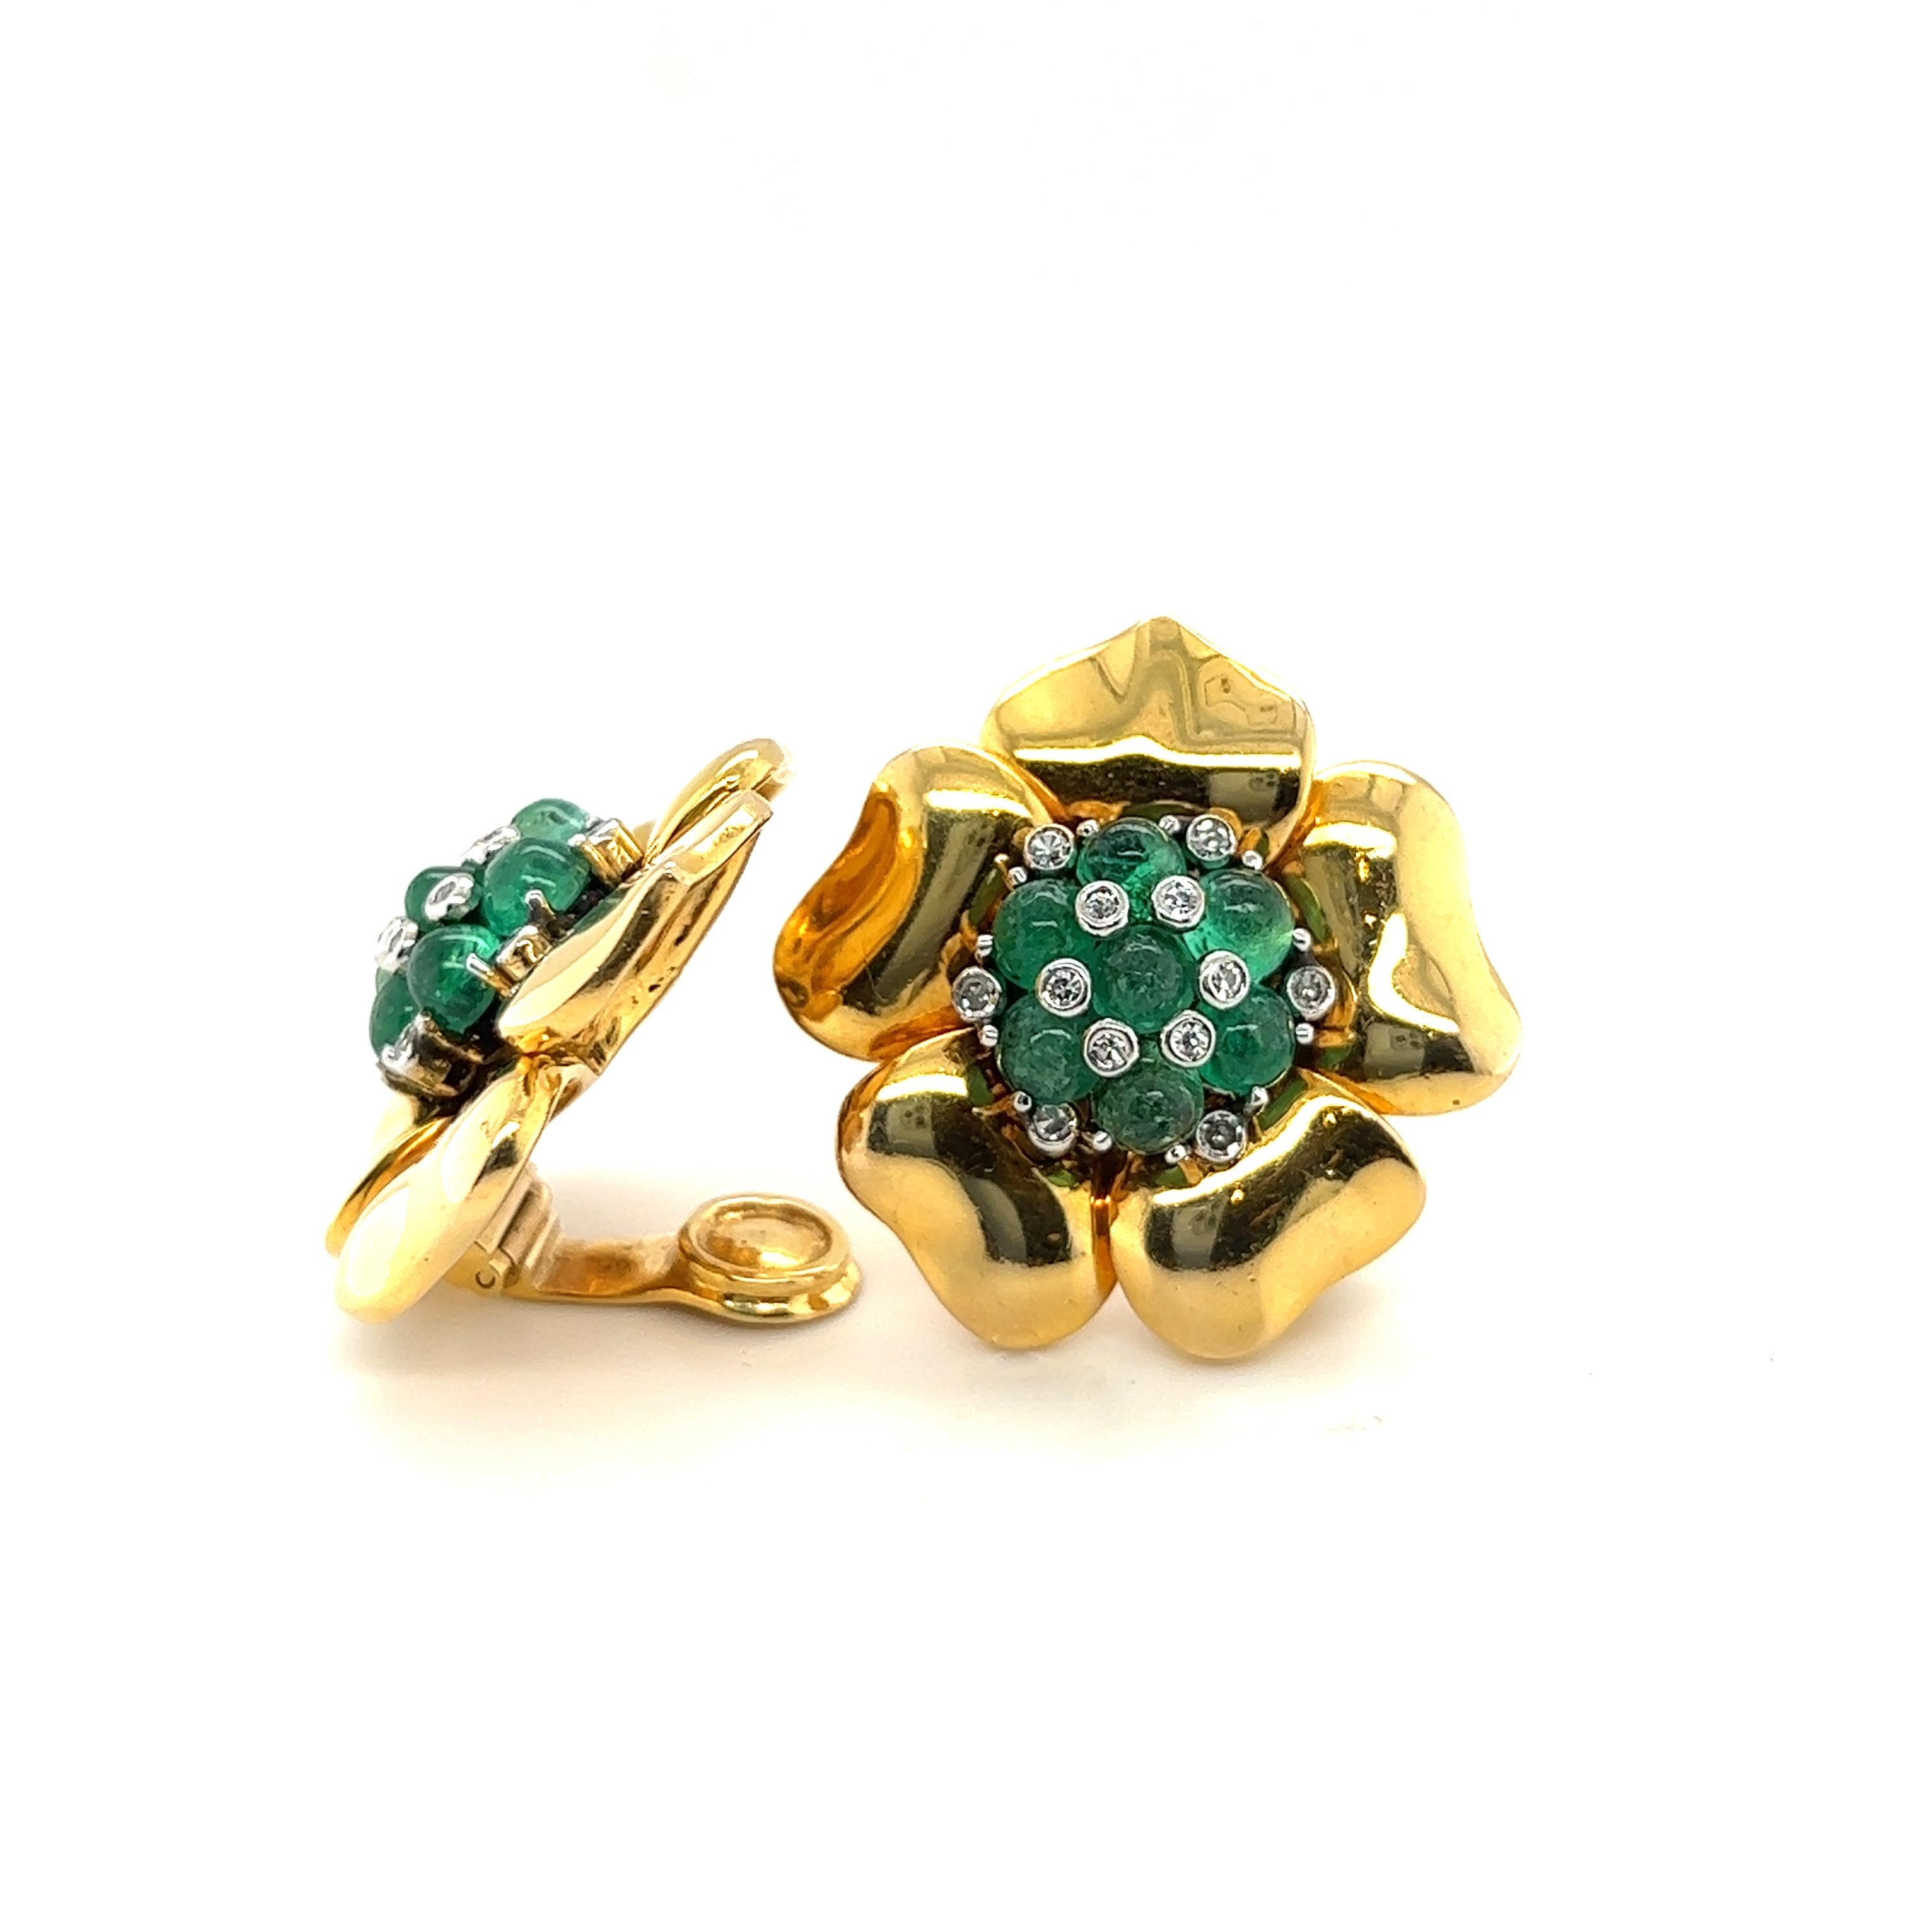 Gorgeous pair of Trabert & Hoeffer Mauboussin 14 karat yellow gold, emerald and diamond retro earclips, circa 1940s.
Each designed as a flower centering upon a cluster of emerald cabochons and single cut diamonds. The petals are crafted in 14 karat